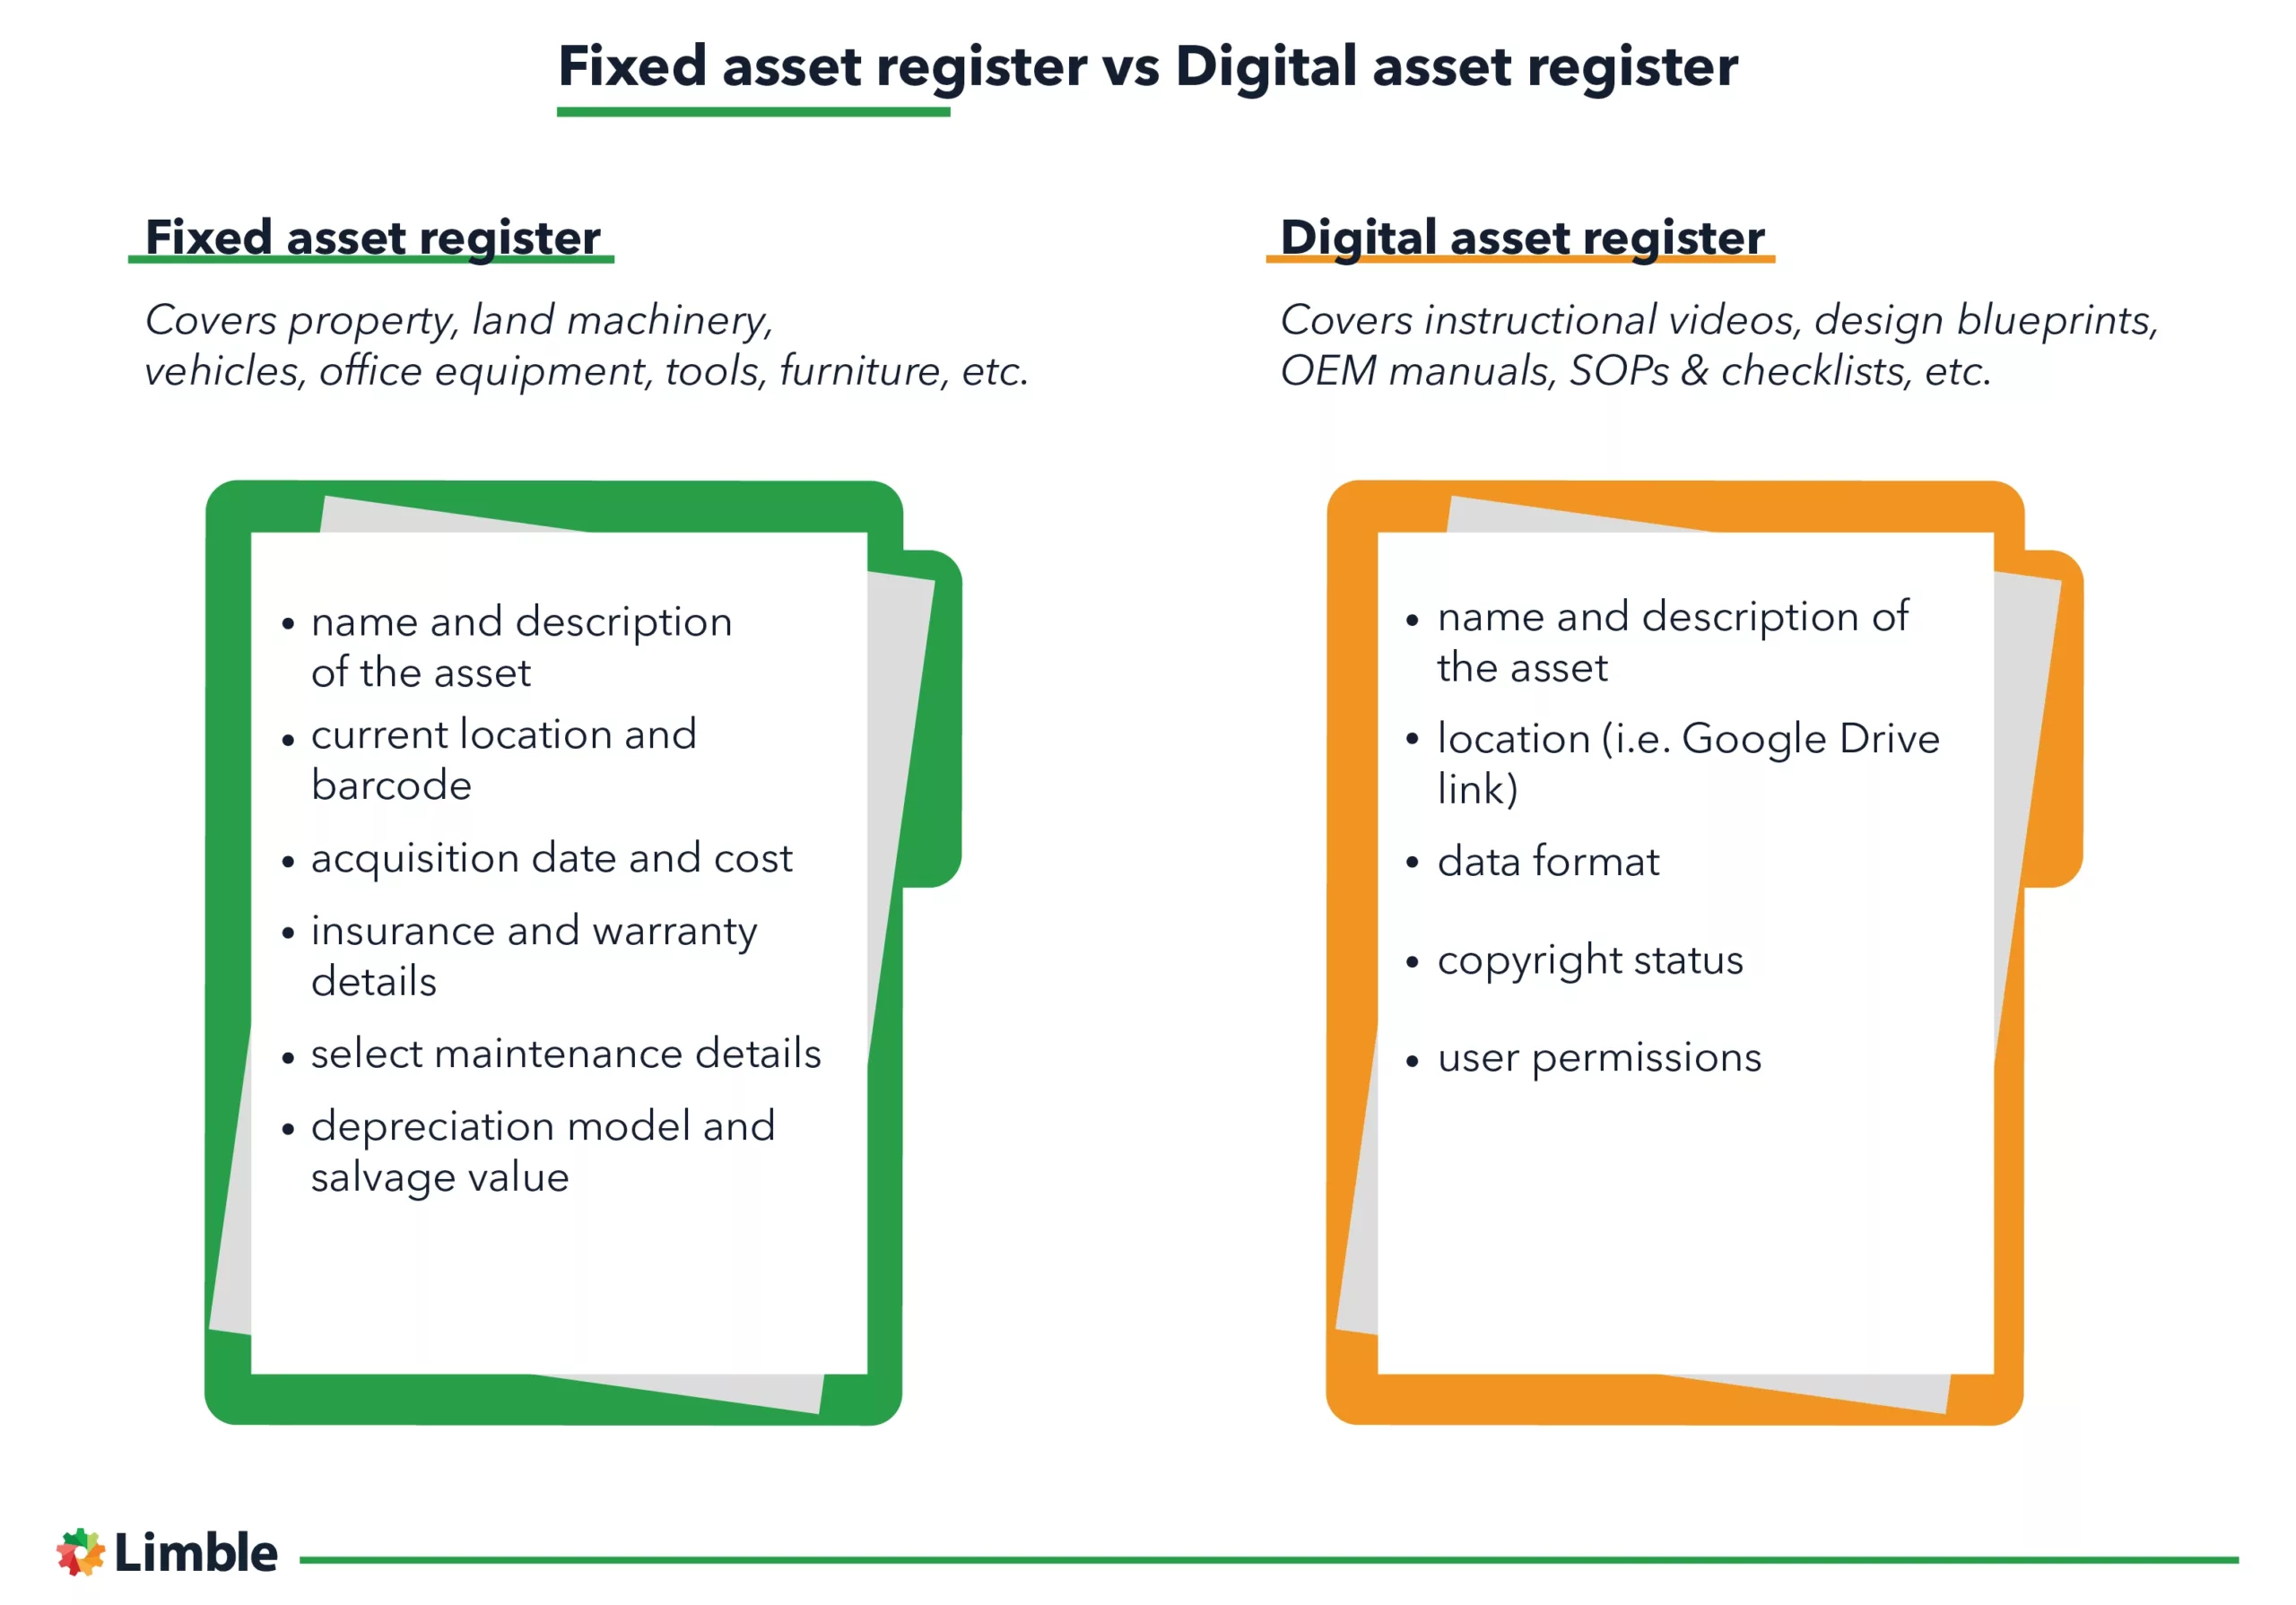 The differences between a fixed asset register and a digital asset register.